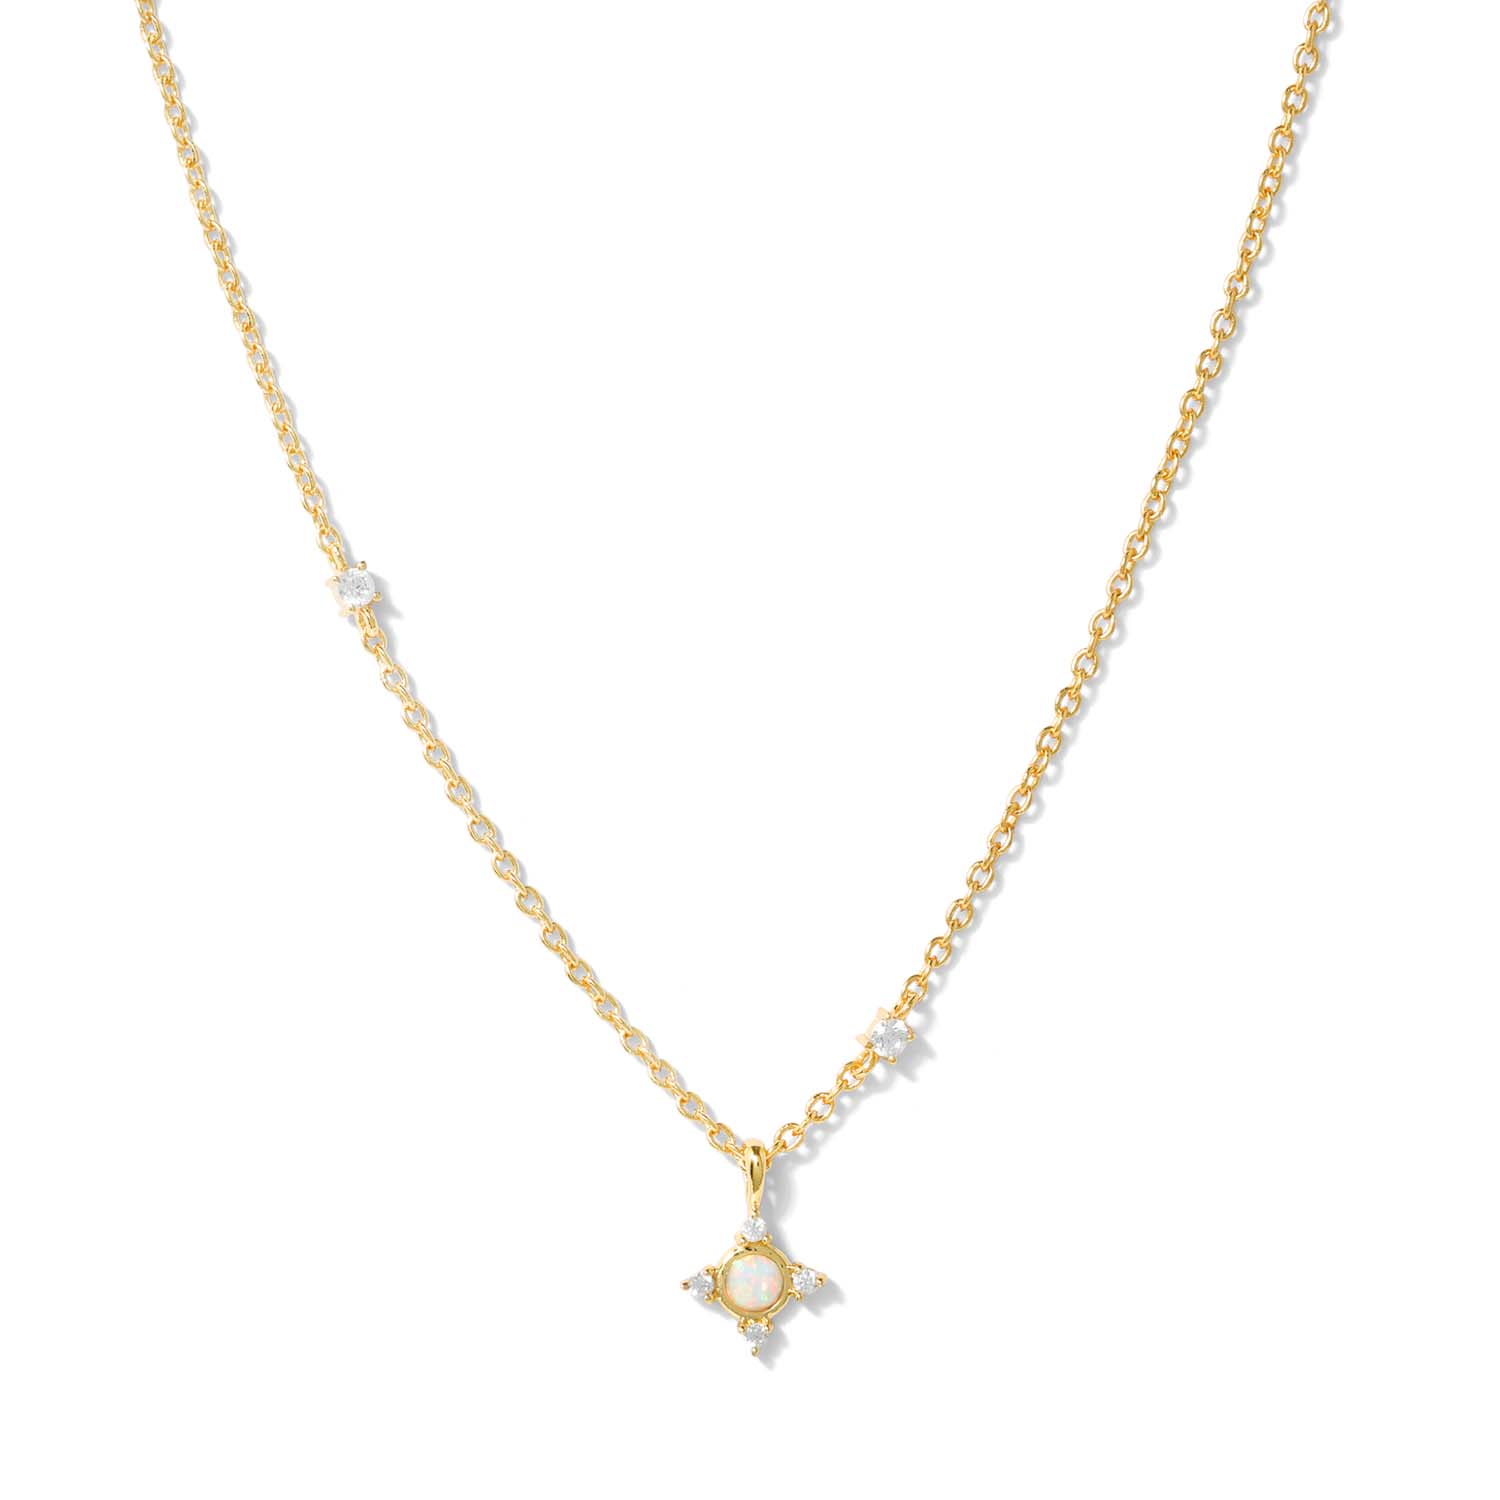 Elegant and minimalist necklace. Gold pendant necklace set with opals and cubic zirconia stones.